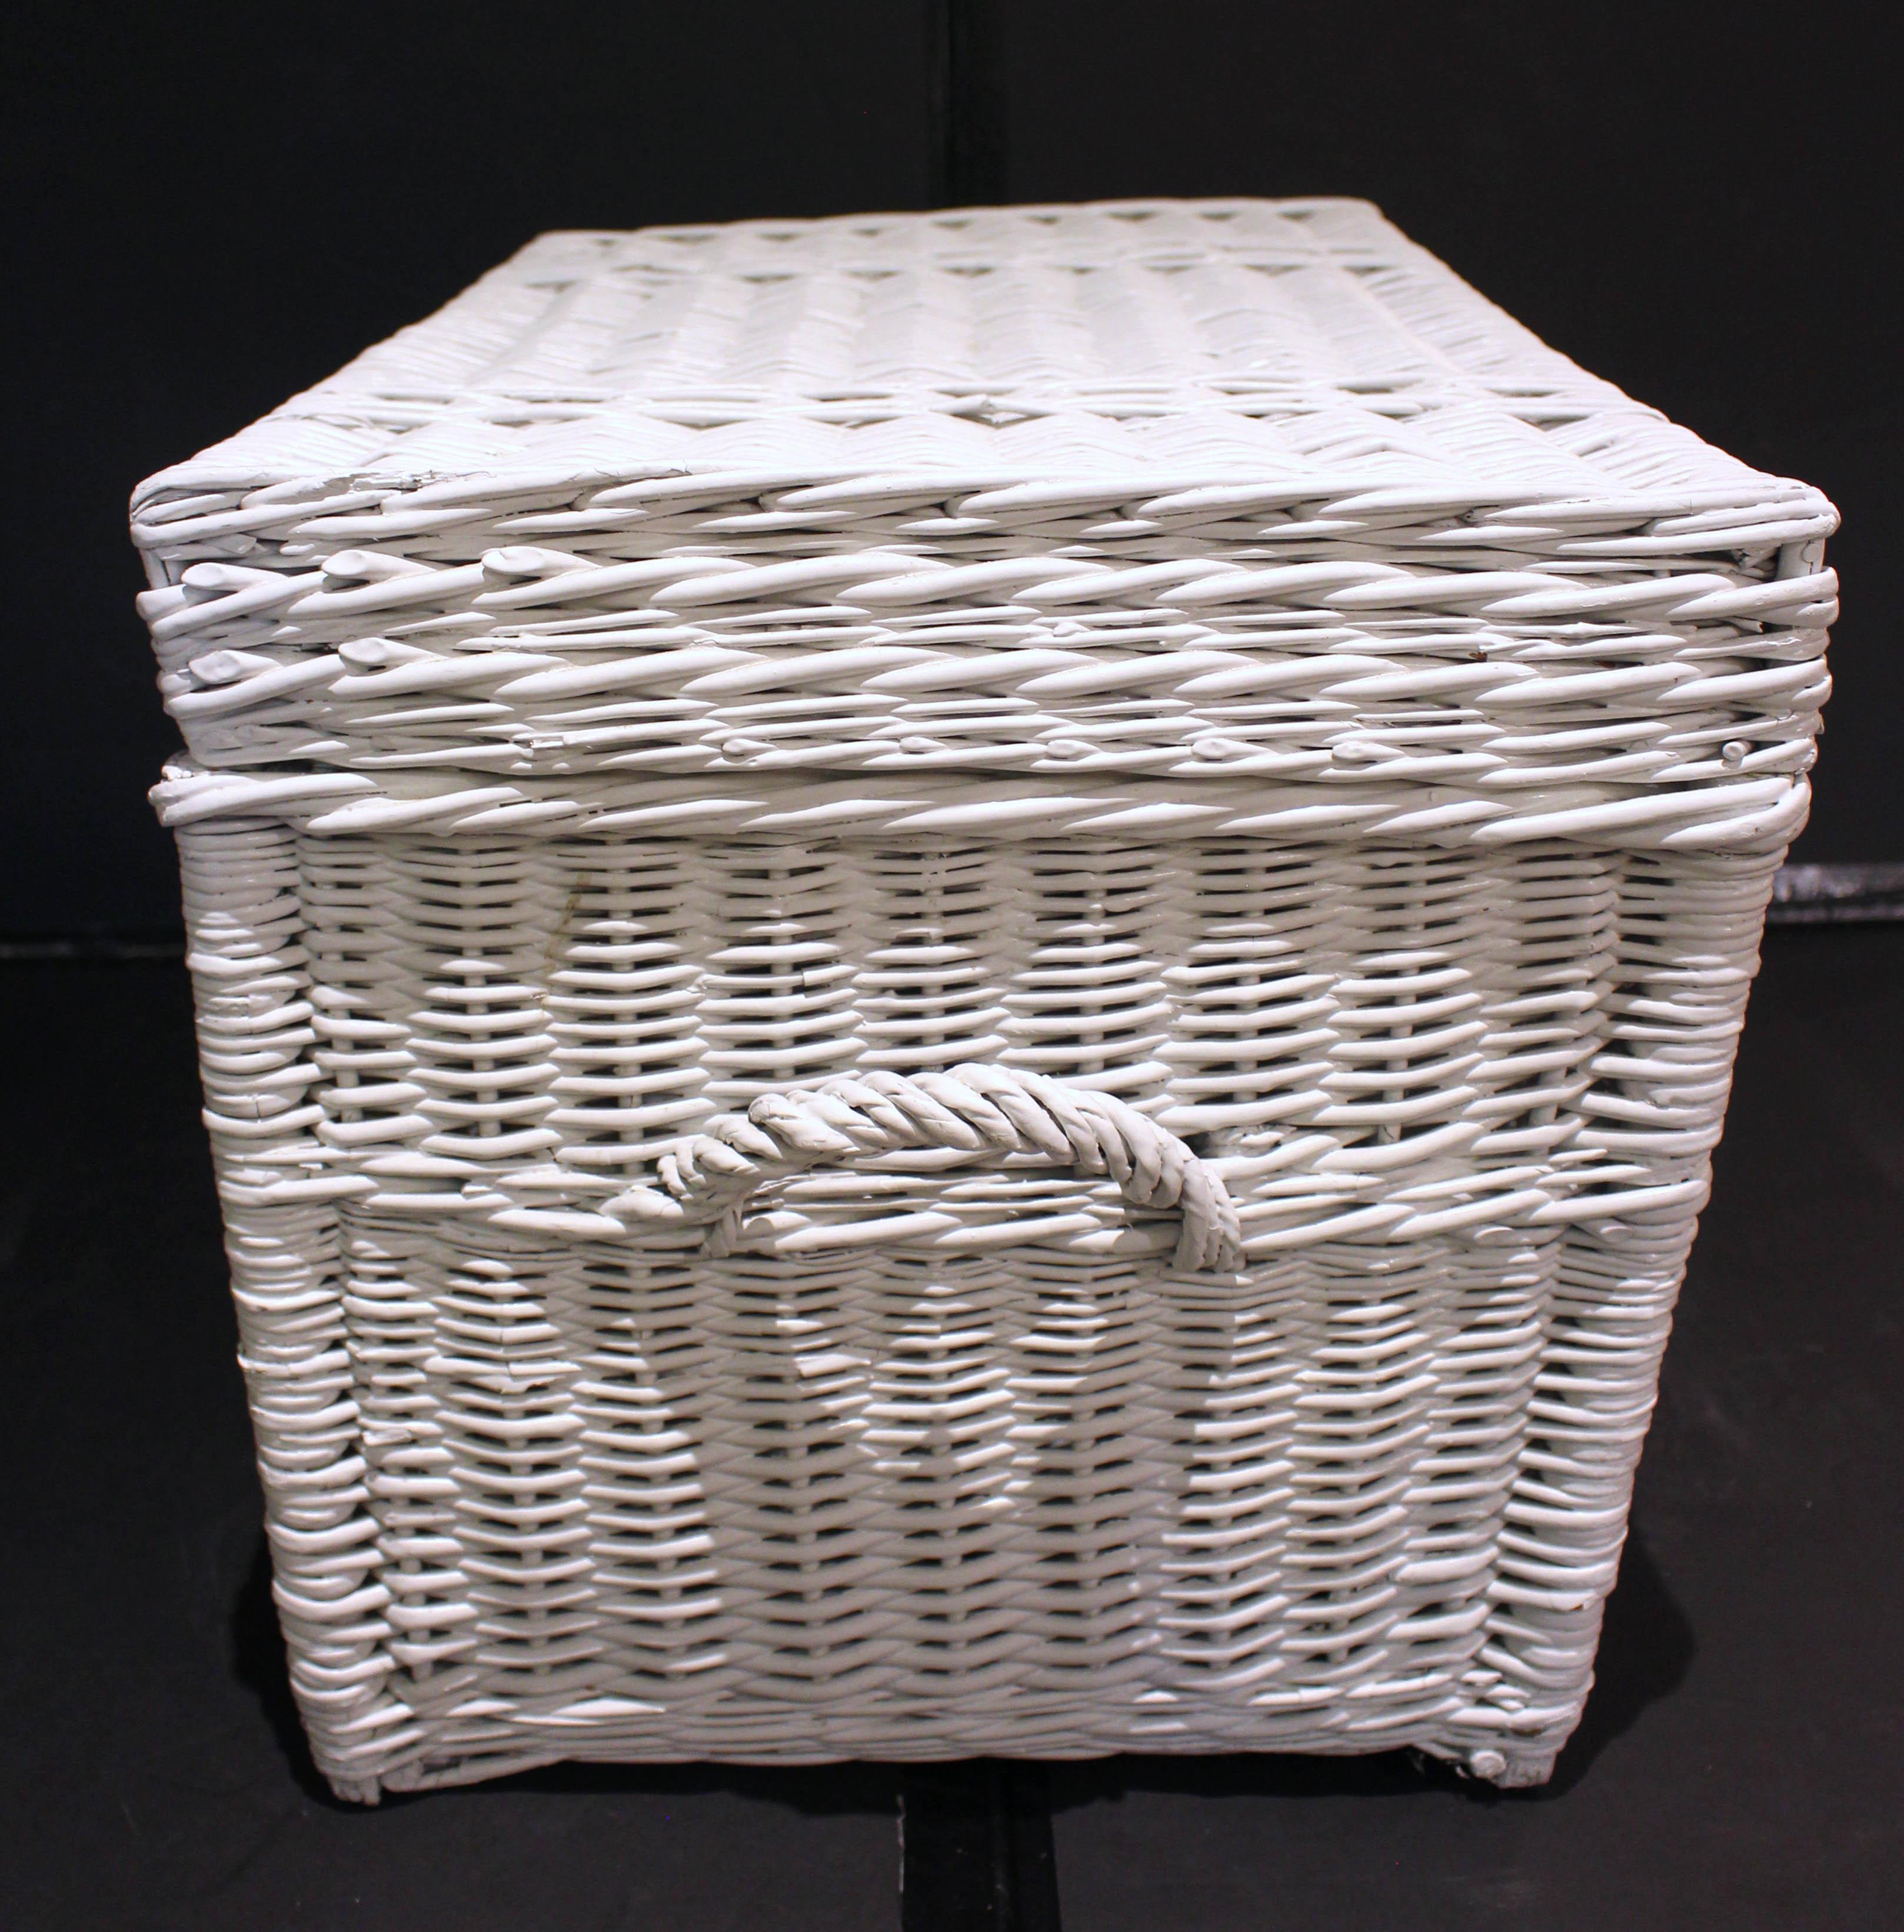 Early 20th Century Wicker Trunk or Hamper, New England In Good Condition For Sale In Chapel Hill, NC